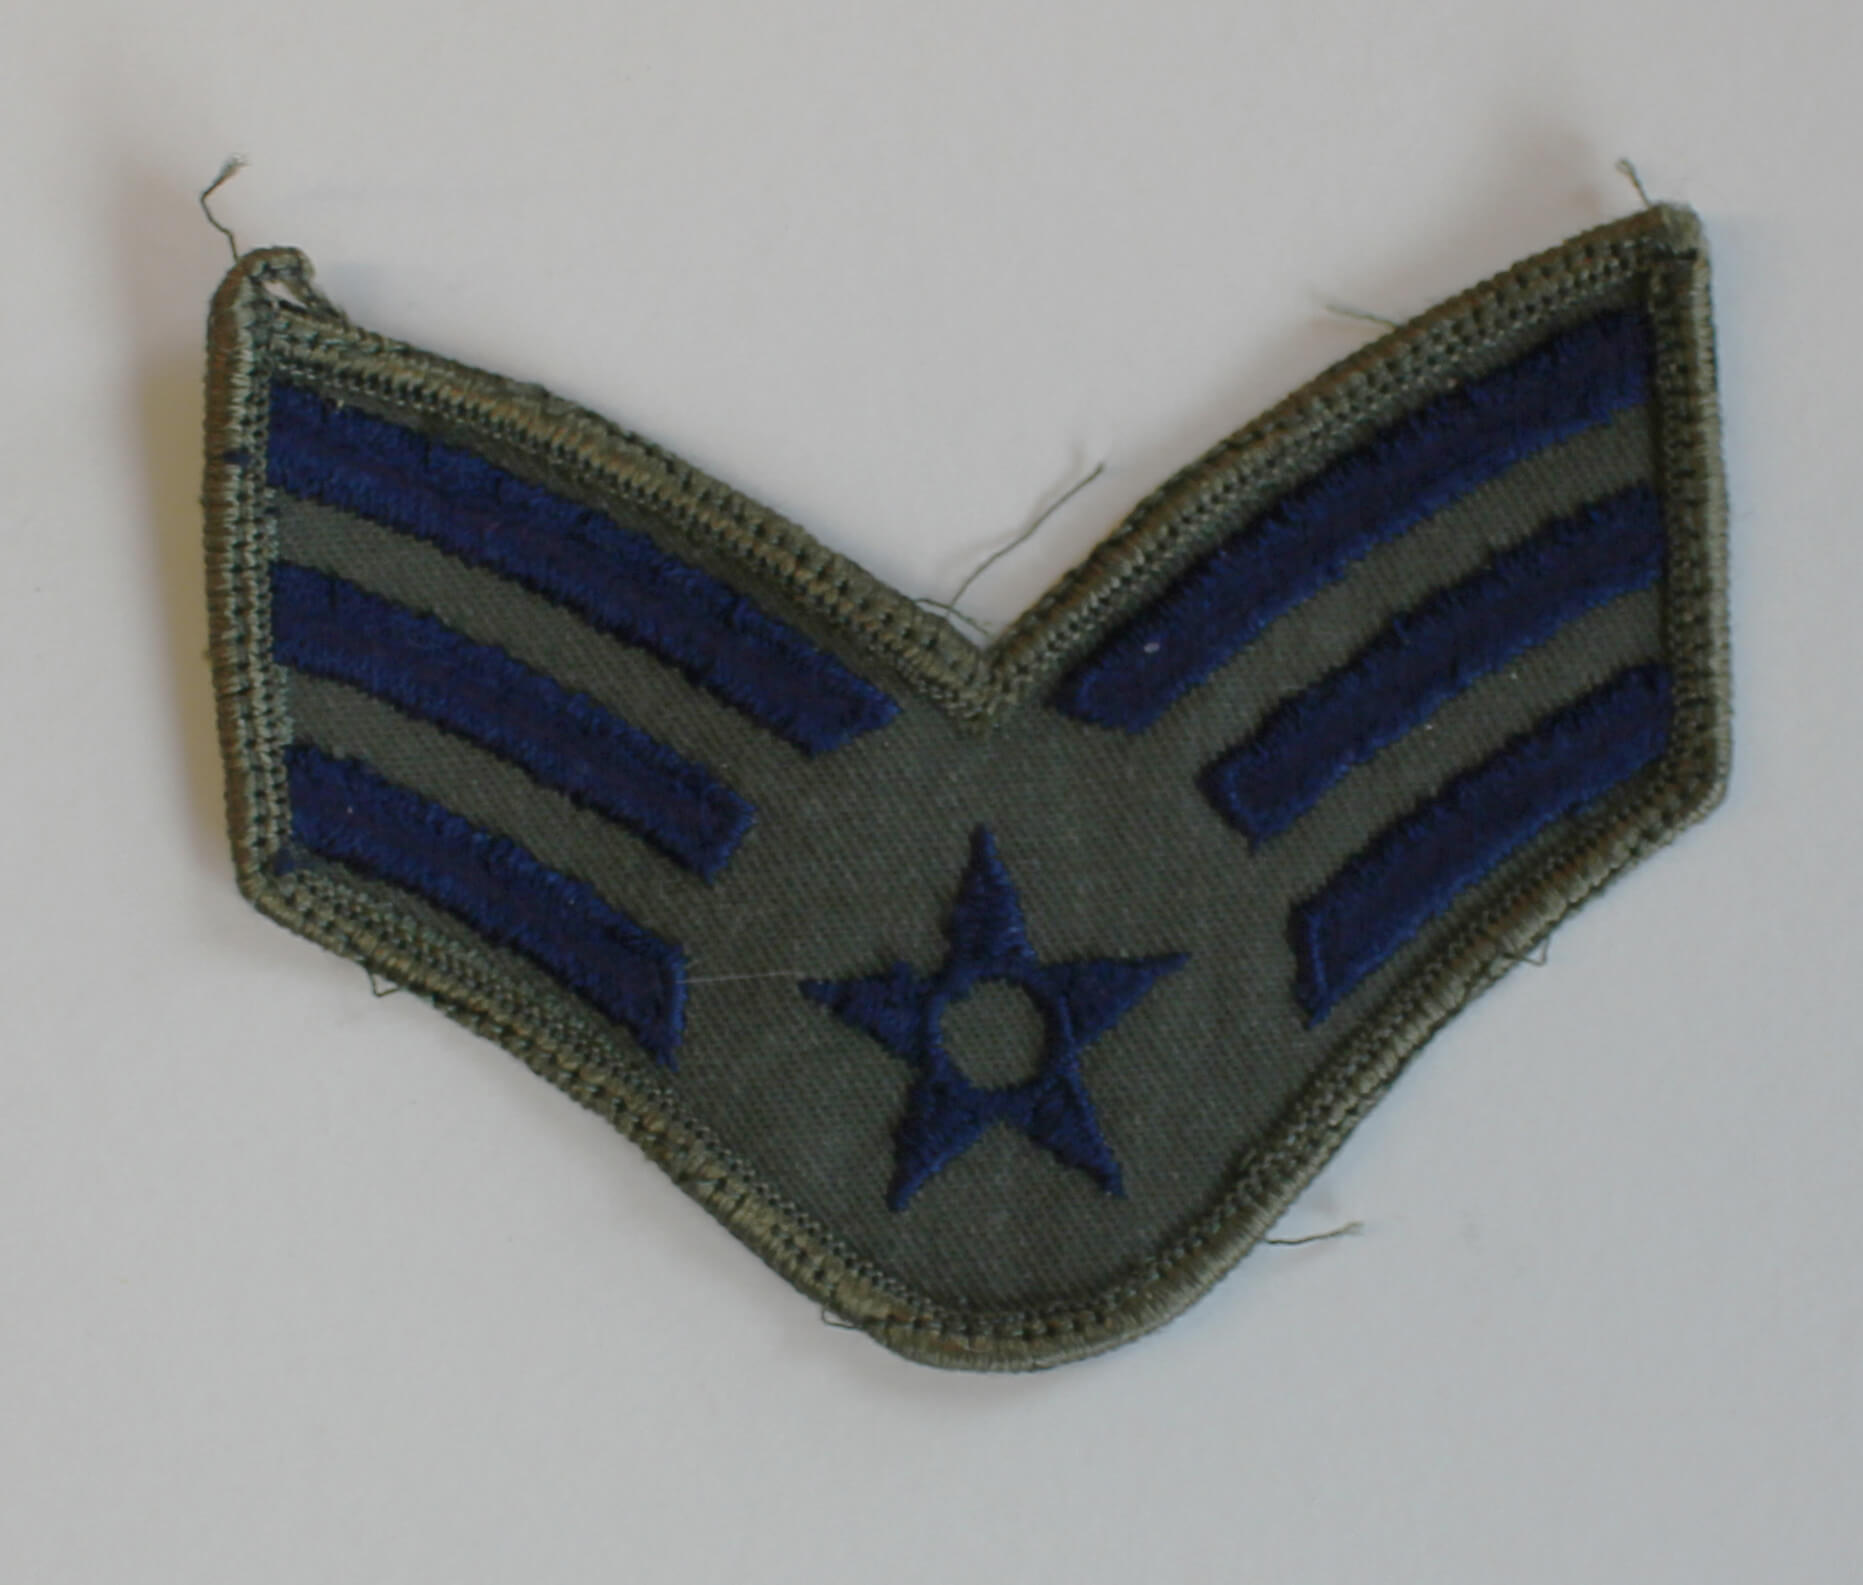 Green and blue military patch with star in center